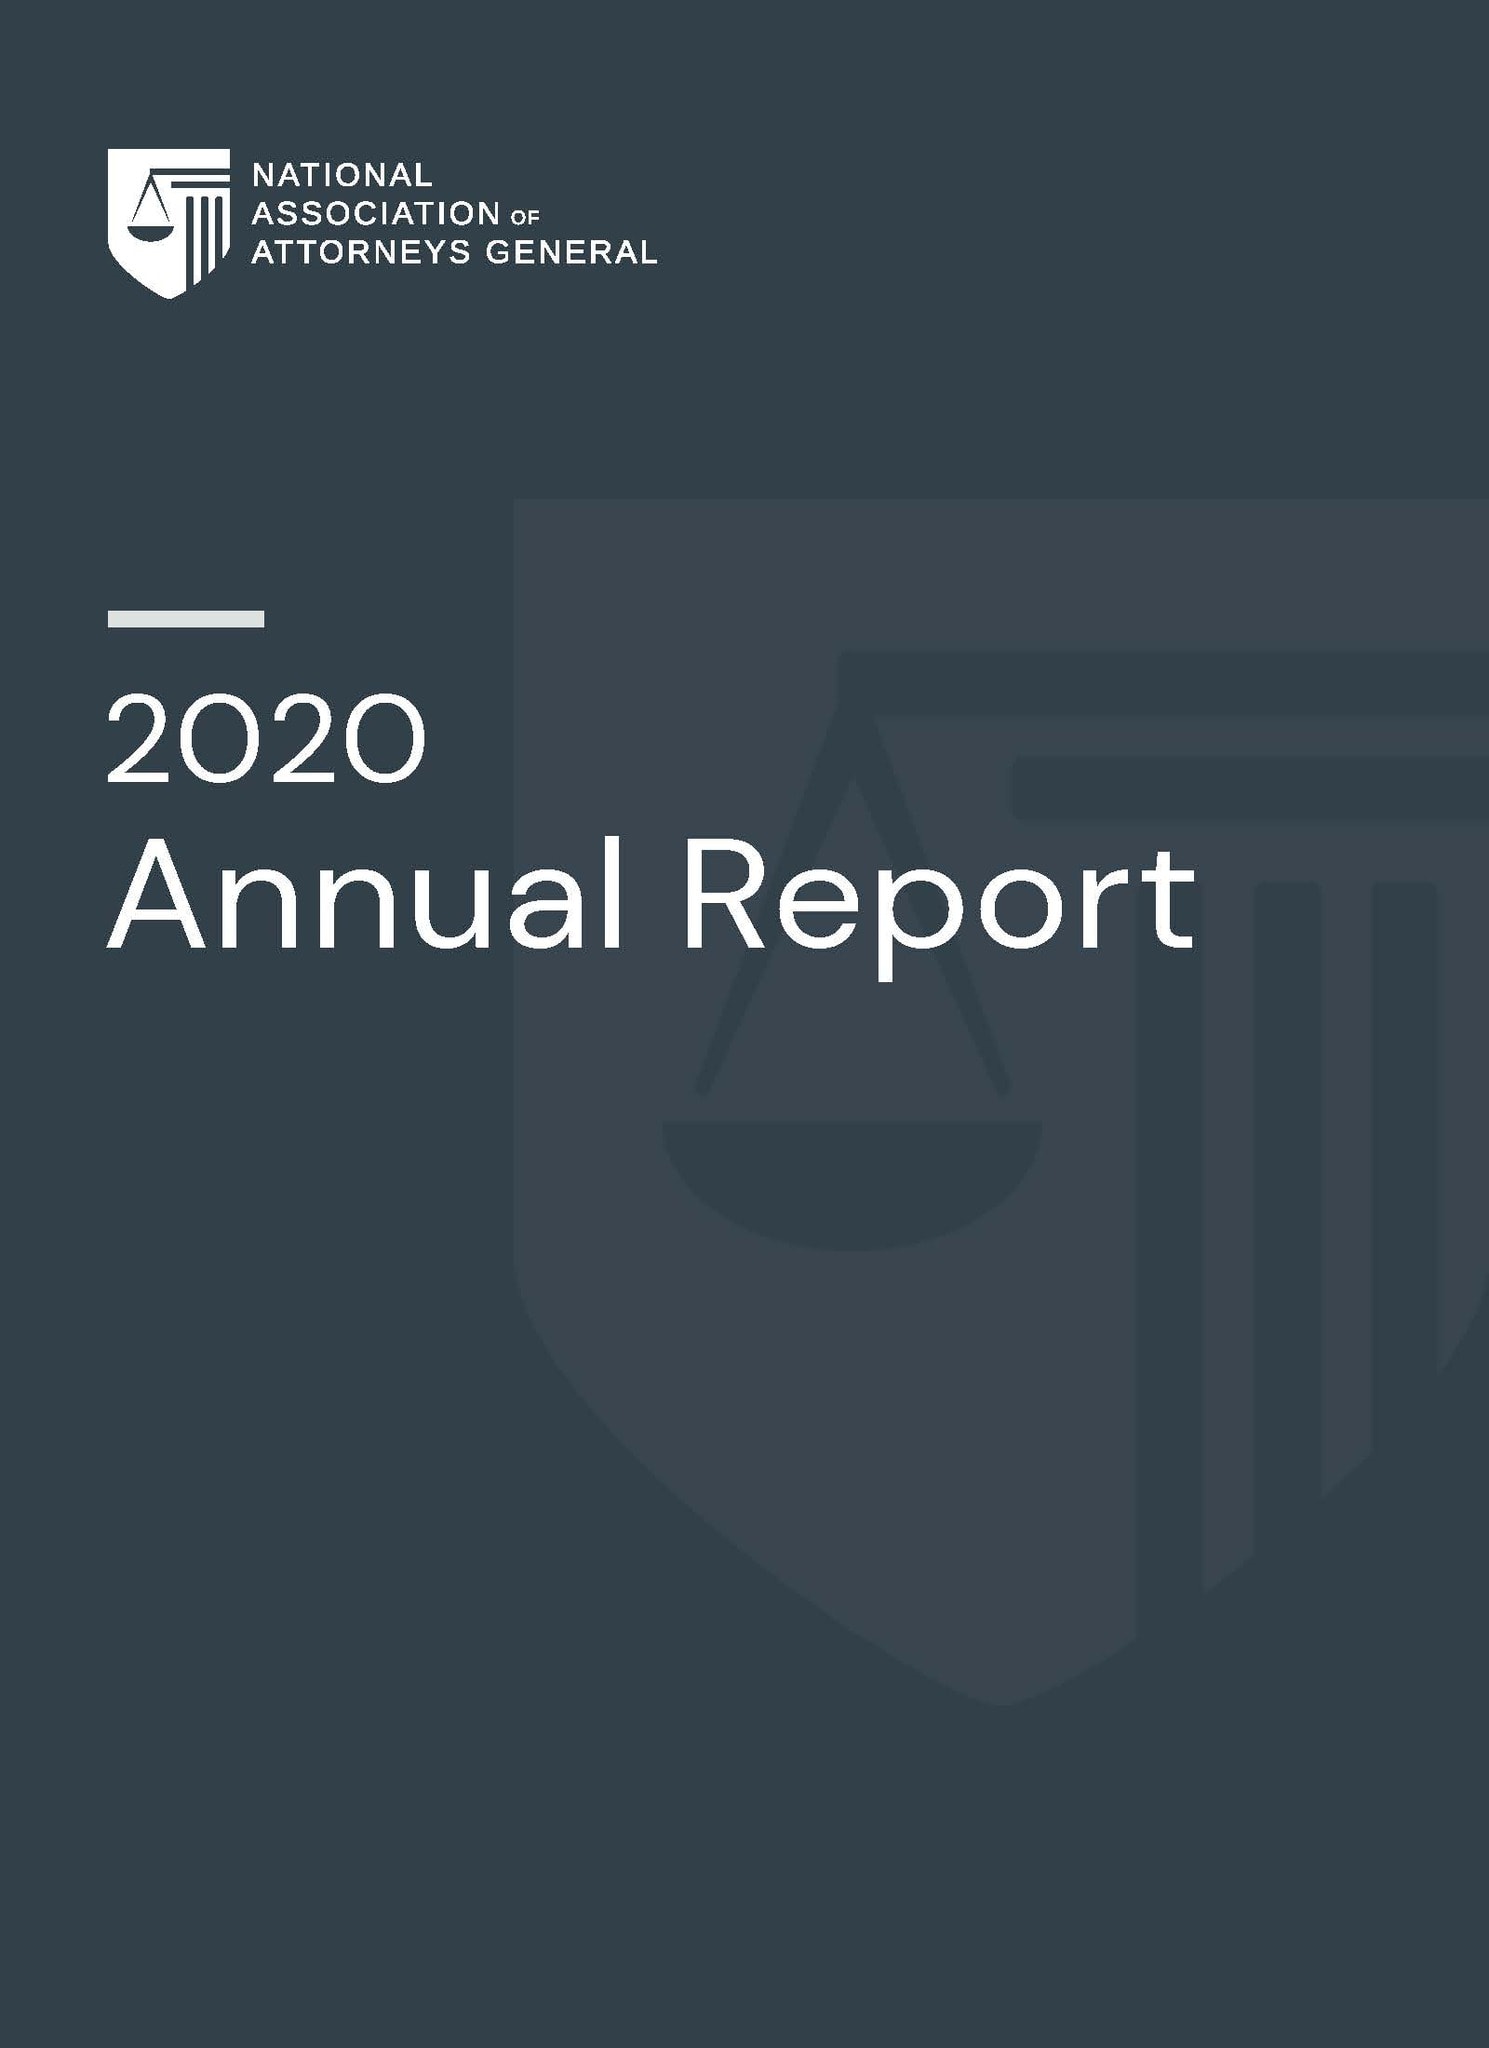 cover page for the 2020 annual report